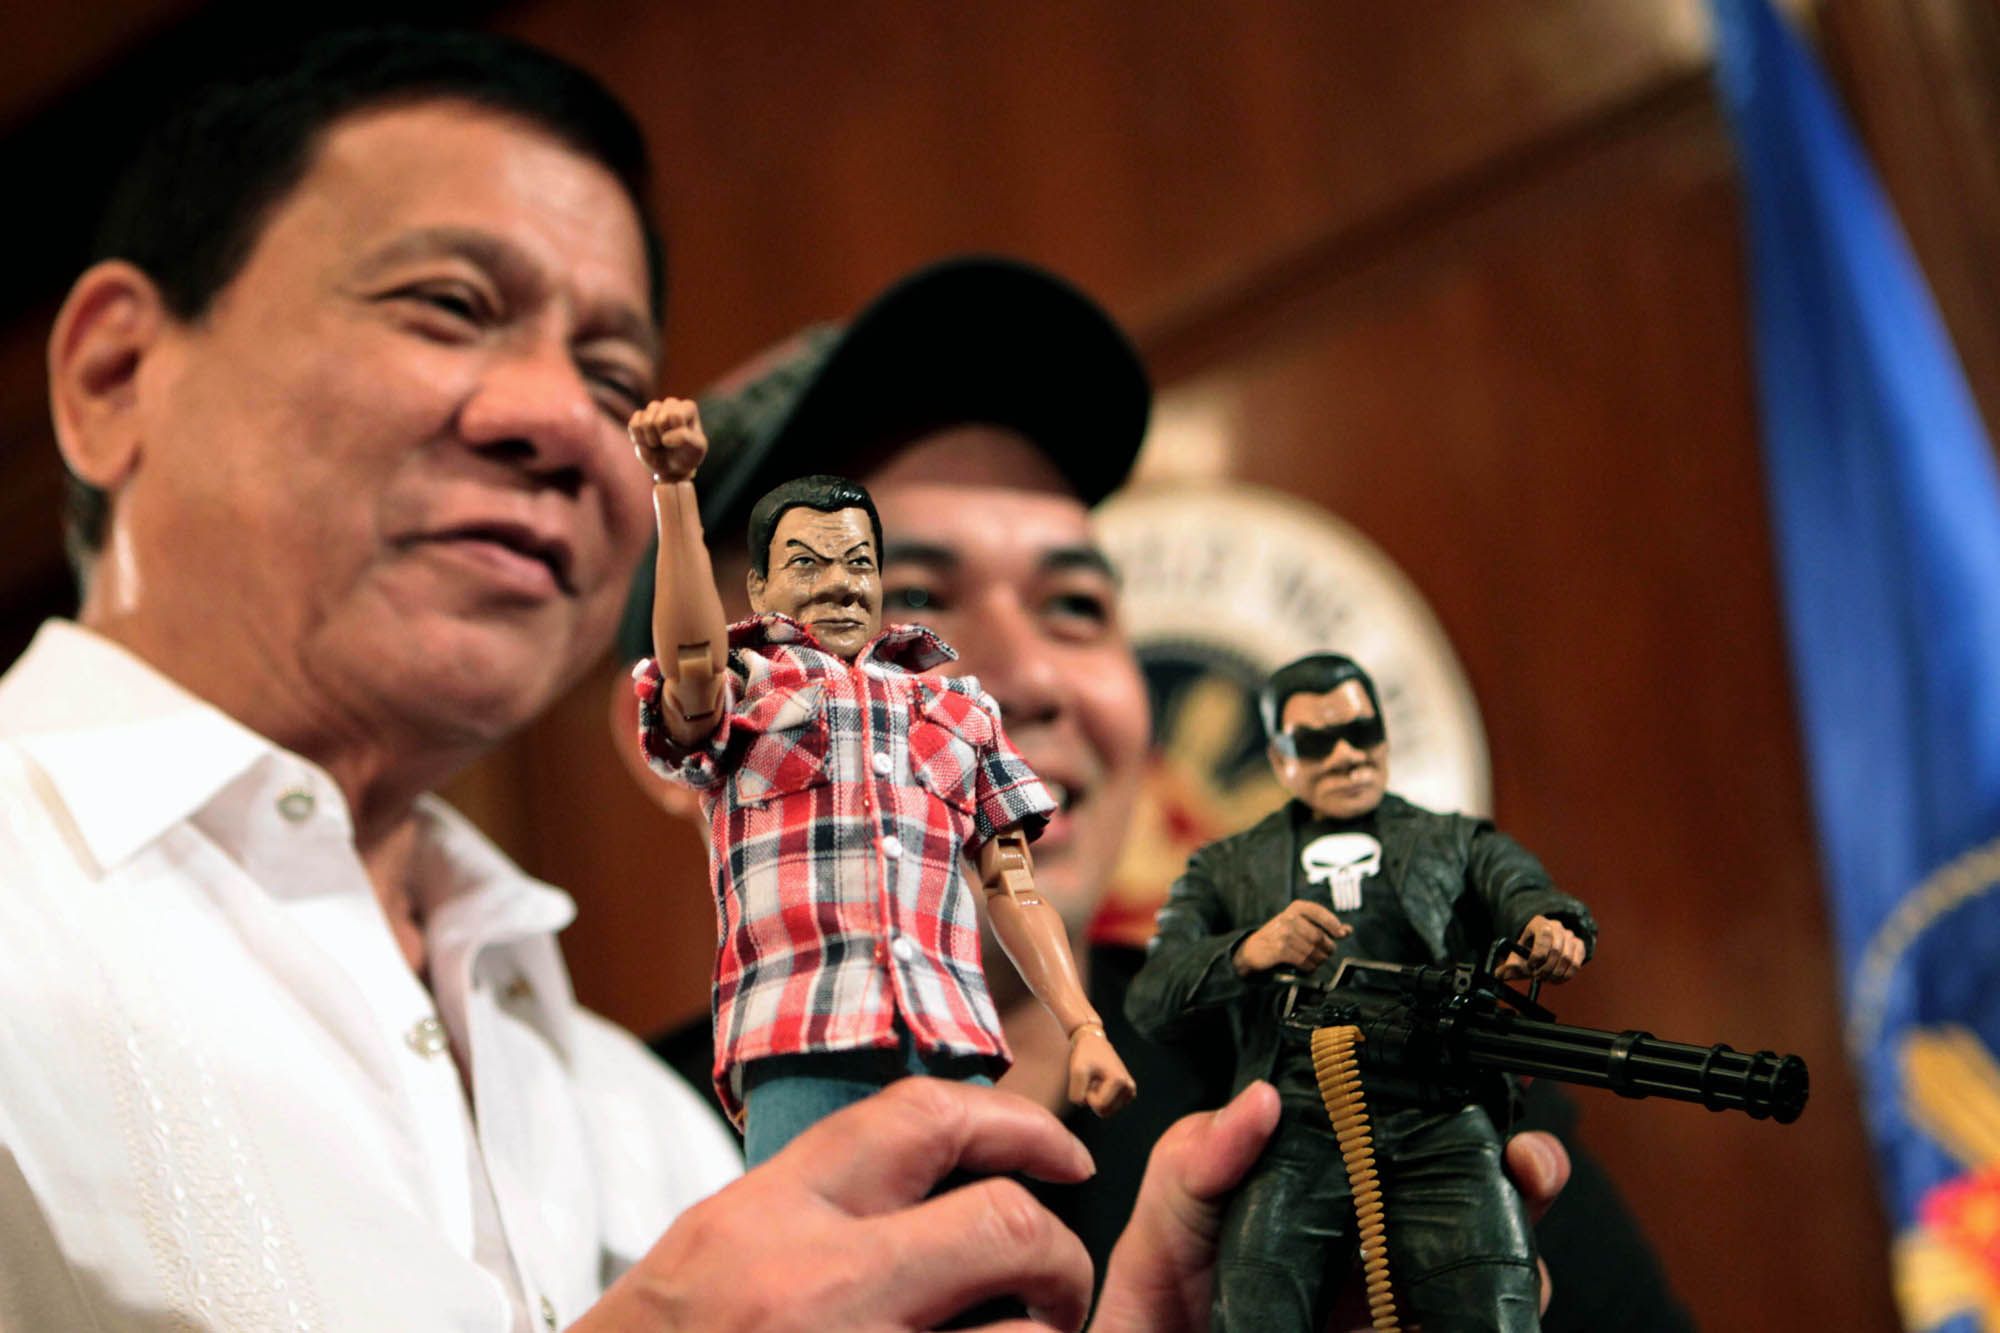 THE SIMPLE AND THE PUNISHER. President Rodrigo R. Duterte poses with toy maker Dennis Mendoza while showing two custom-made action figures of himself. One shows the simple Duterte who is often seen wearing a checkered polo and denim jeans while the other shows the resemblance of the cartoon character 'The Punisher' as he has been known to have an iron fist approach in addressing criminalities. ROBINSON NIÑAL/PPD